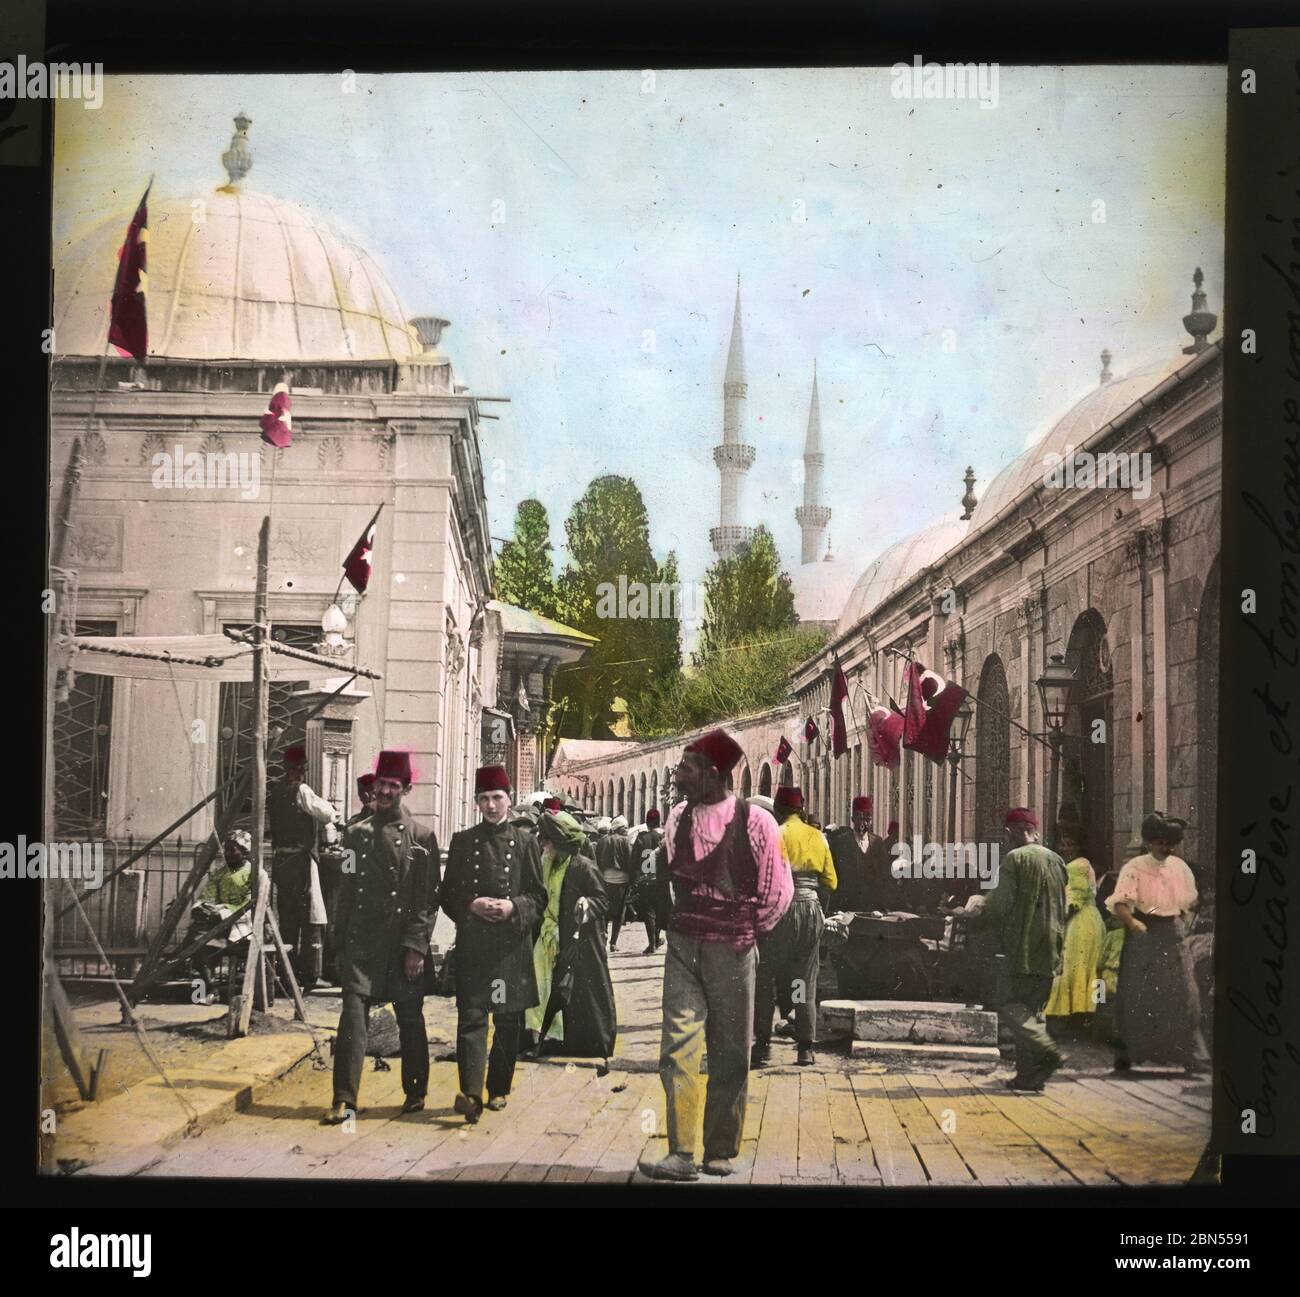 Piers and imperial tombs form the main street of Eyoub. The Eyüp district of Istanbul is located outside the city walls near the Golden Horn. Color (presumably hand colored) slide from around 1910. Photograph on dry glass plate from the Herry W. Schaefer collection. Stock Photo